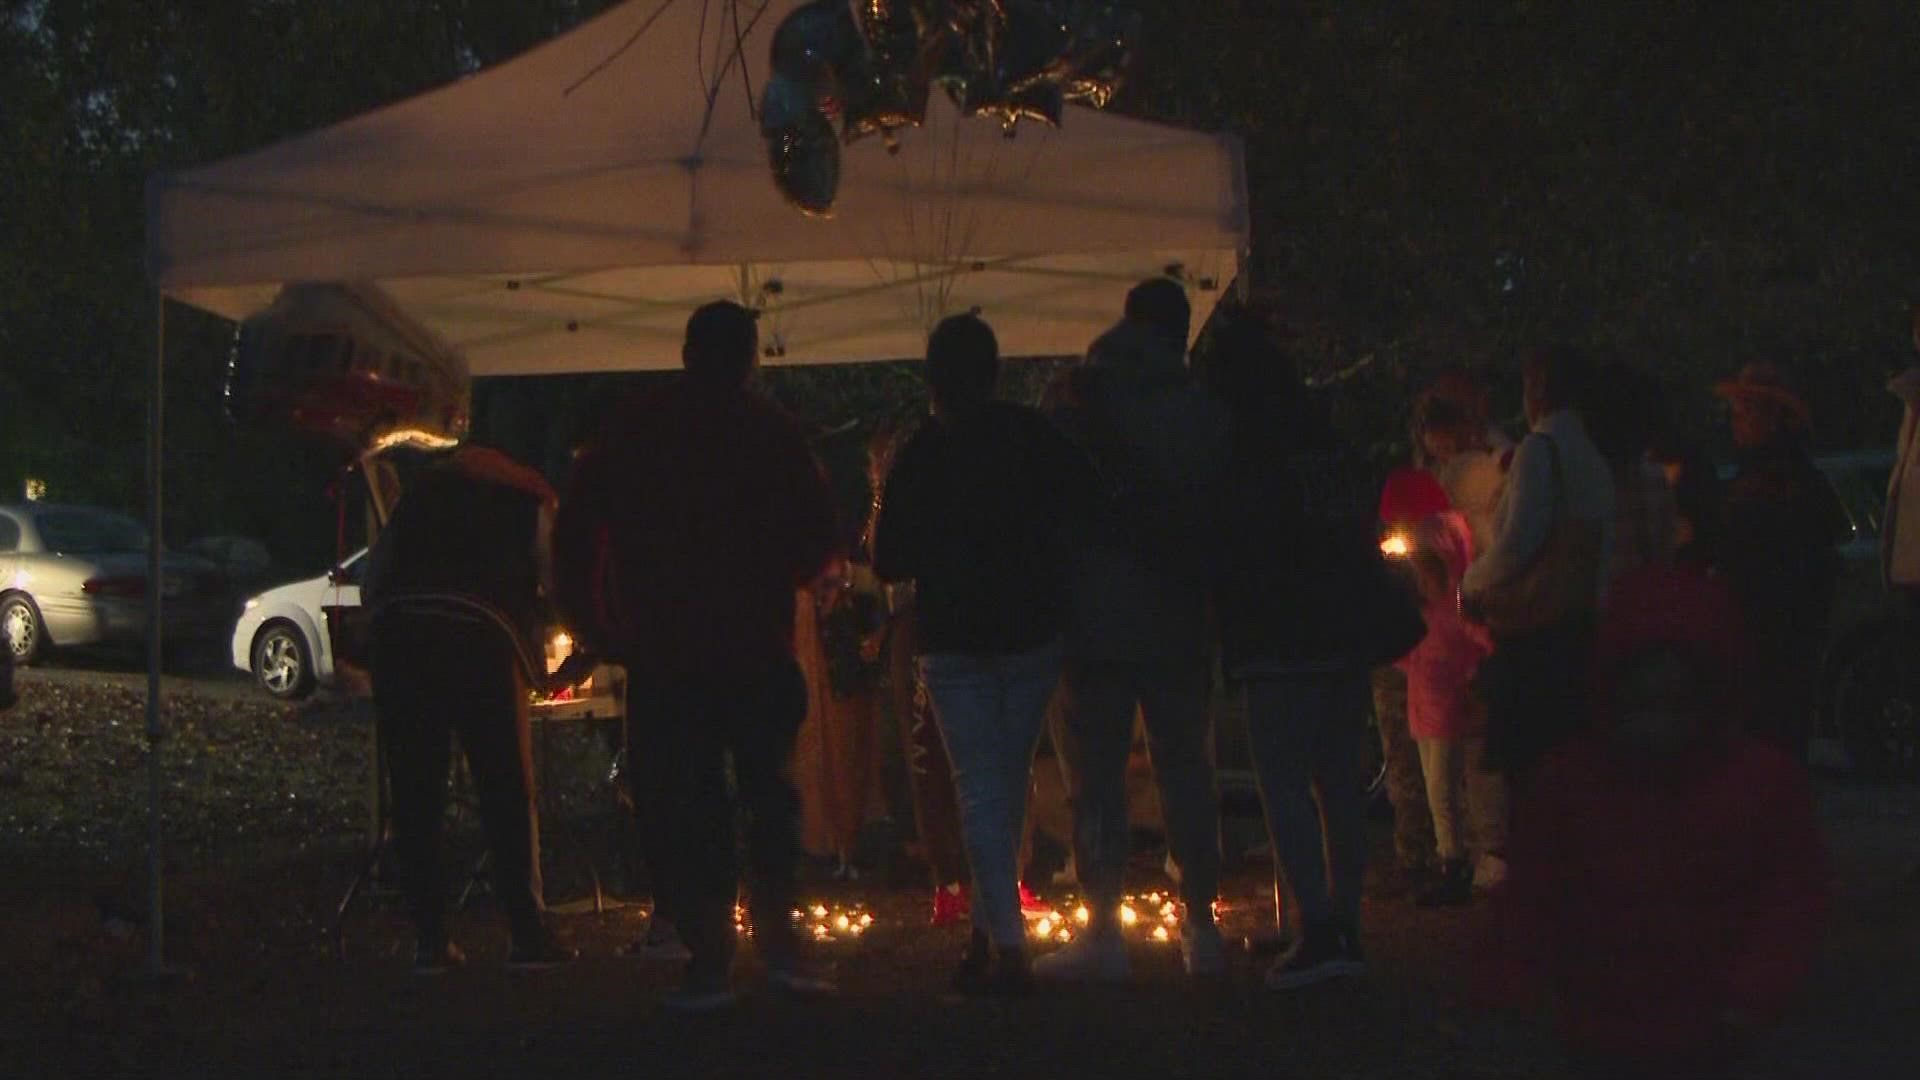 Days after he was positively identified, the family of Cairo Jordan were able to celebrate his life by holding a vigil in his memory.